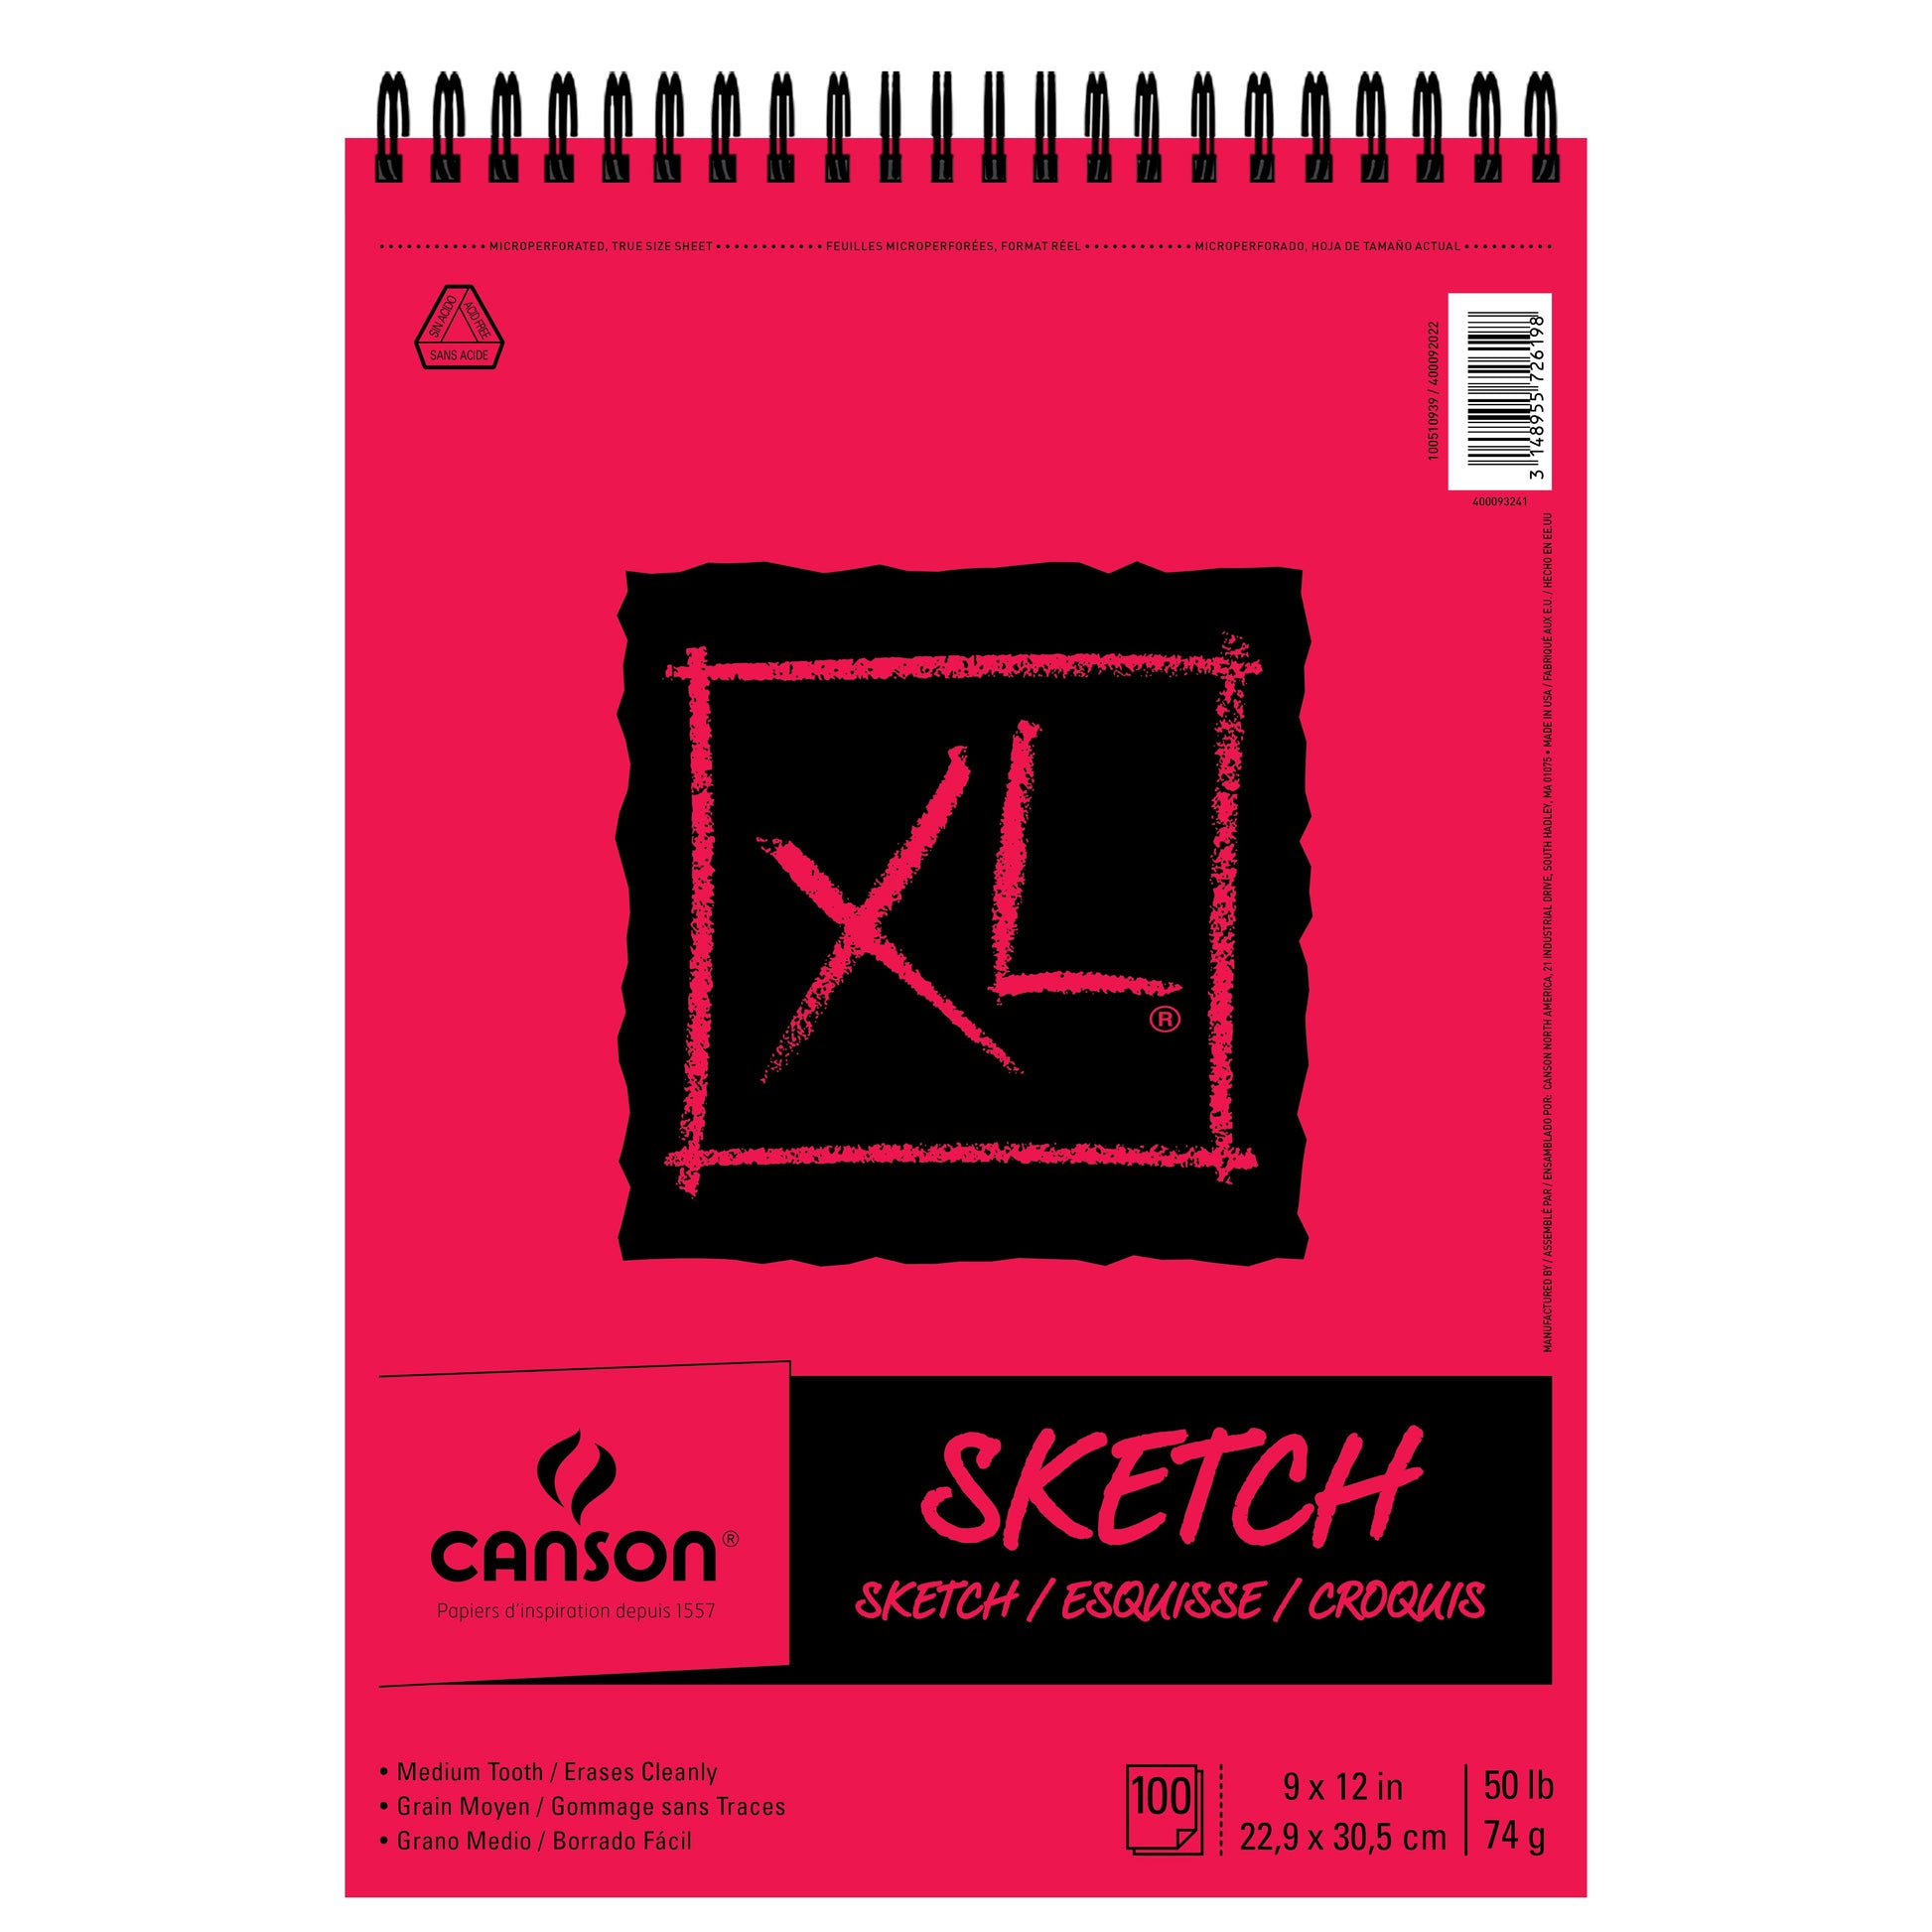 Canson, Art, Canson Xl Mixed Media Paper Pad 98 Lb 9 X 2 Inches 6 Sheets